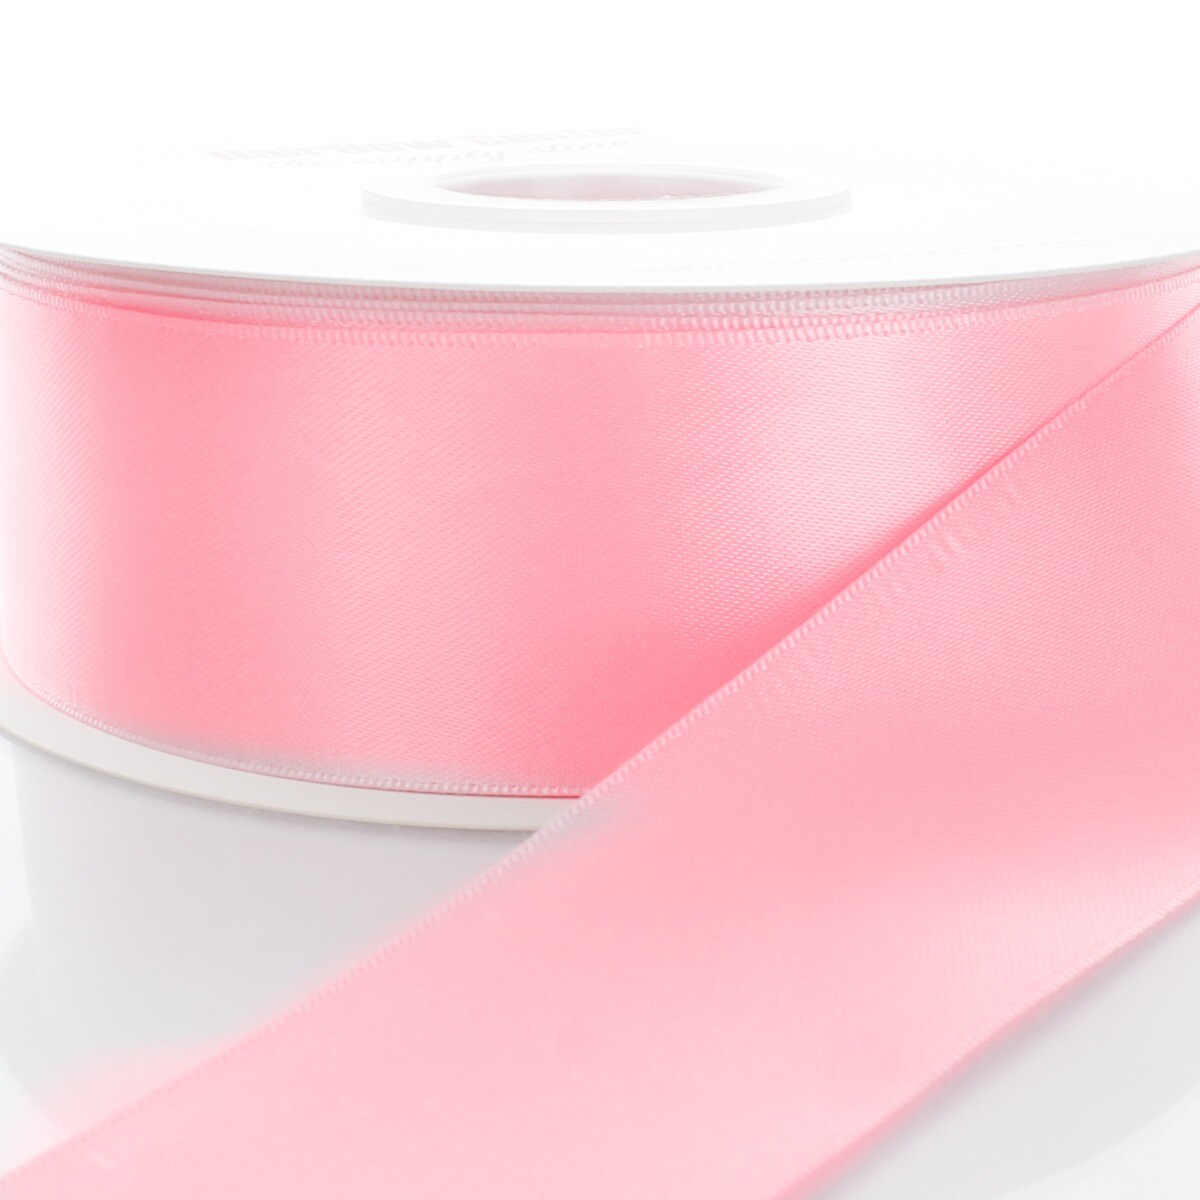 Hot Pink Thin Satin Ribbon for Sale - 100yds.